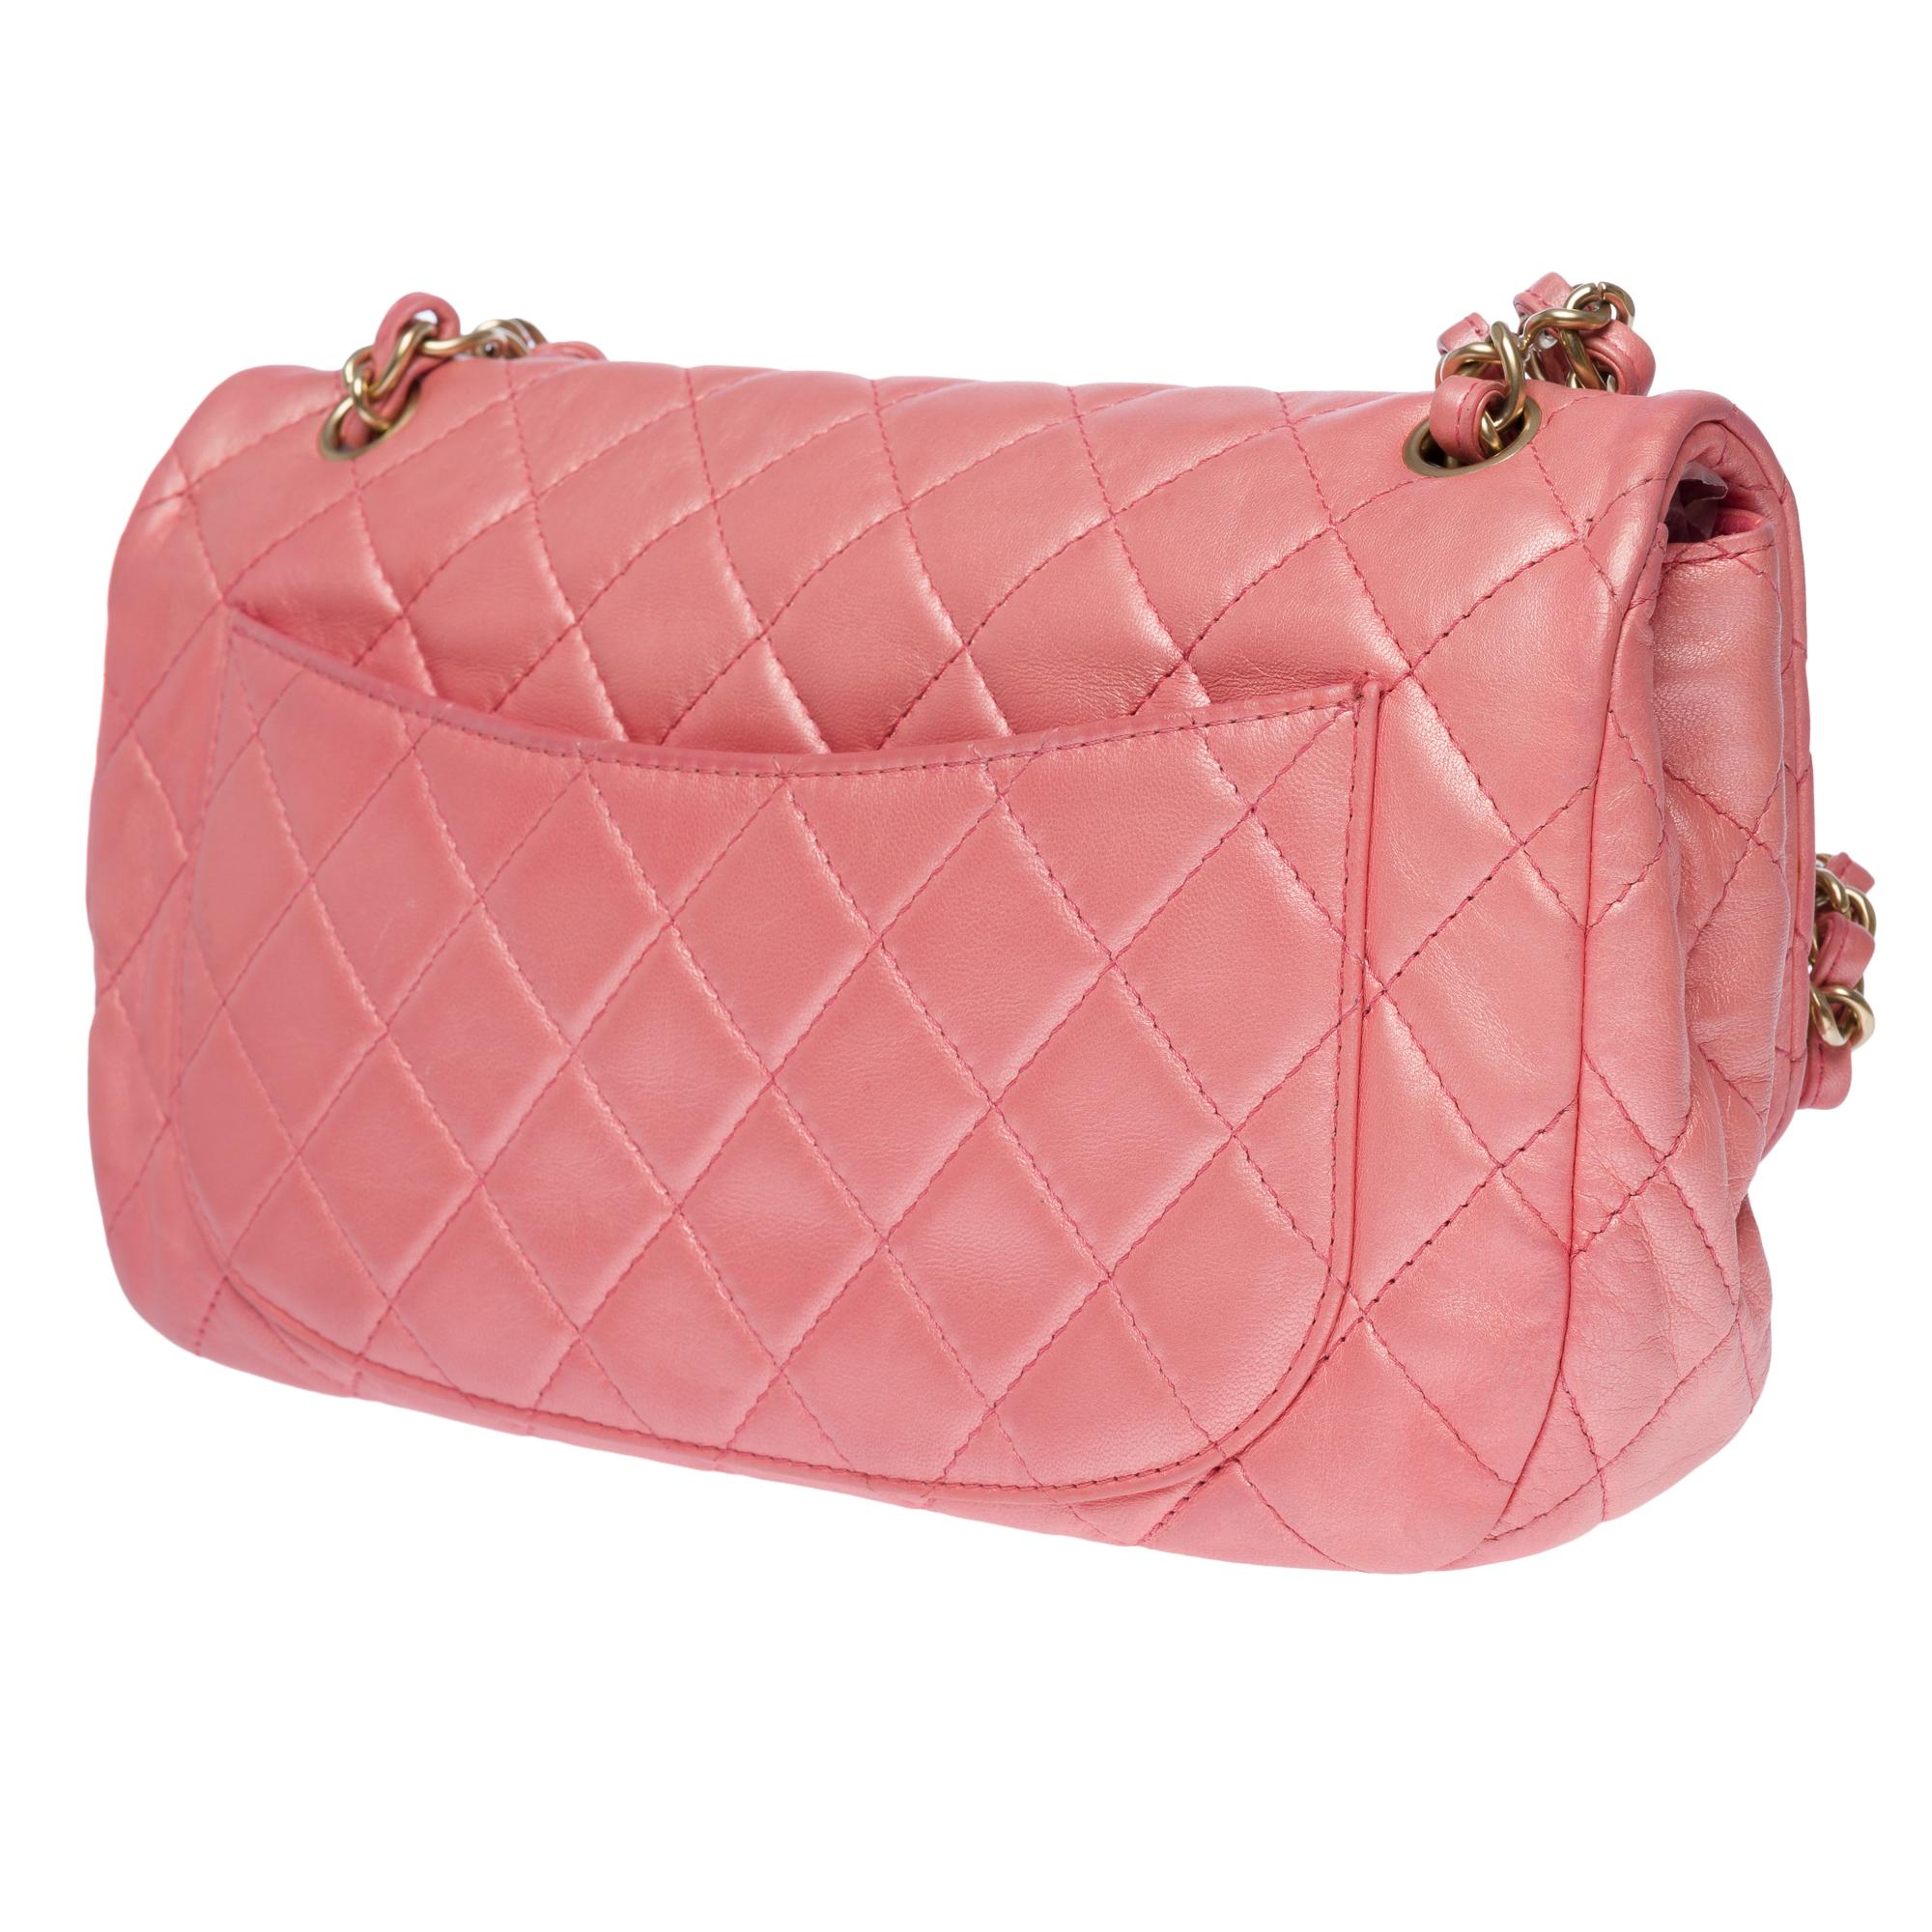 Women's Chanel limited edition shoulder flap bag in Metallic Pink quilted leather, MGHW For Sale